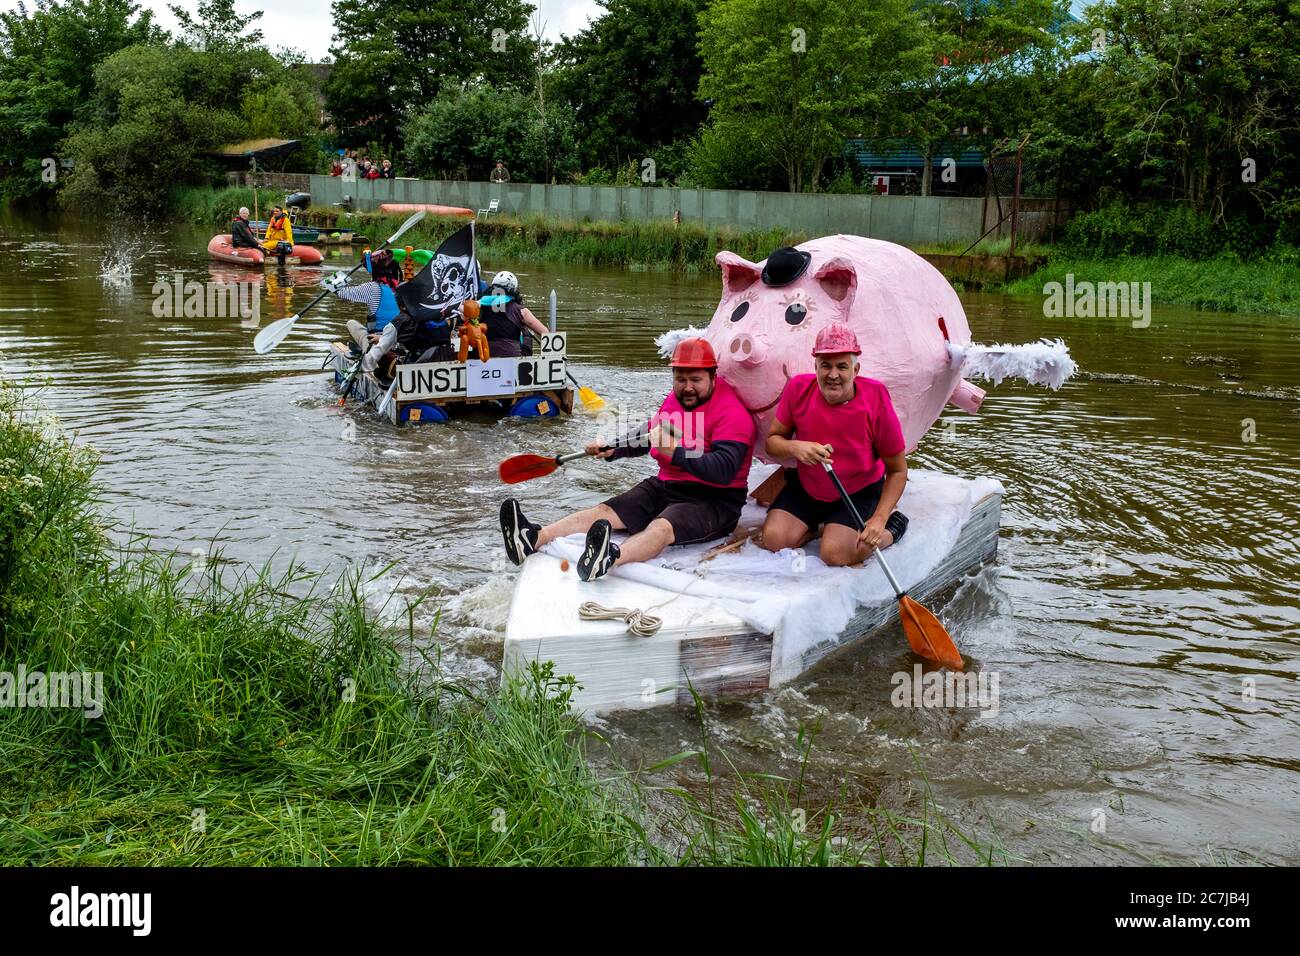 Local People Take Part In The Annual ‘Ouseday’ Raft Race, Paddling On Home Made Rafts In Aid Of Charity From Lewes To Newhaven, River Ouse, Lewes, UK Stock Photo